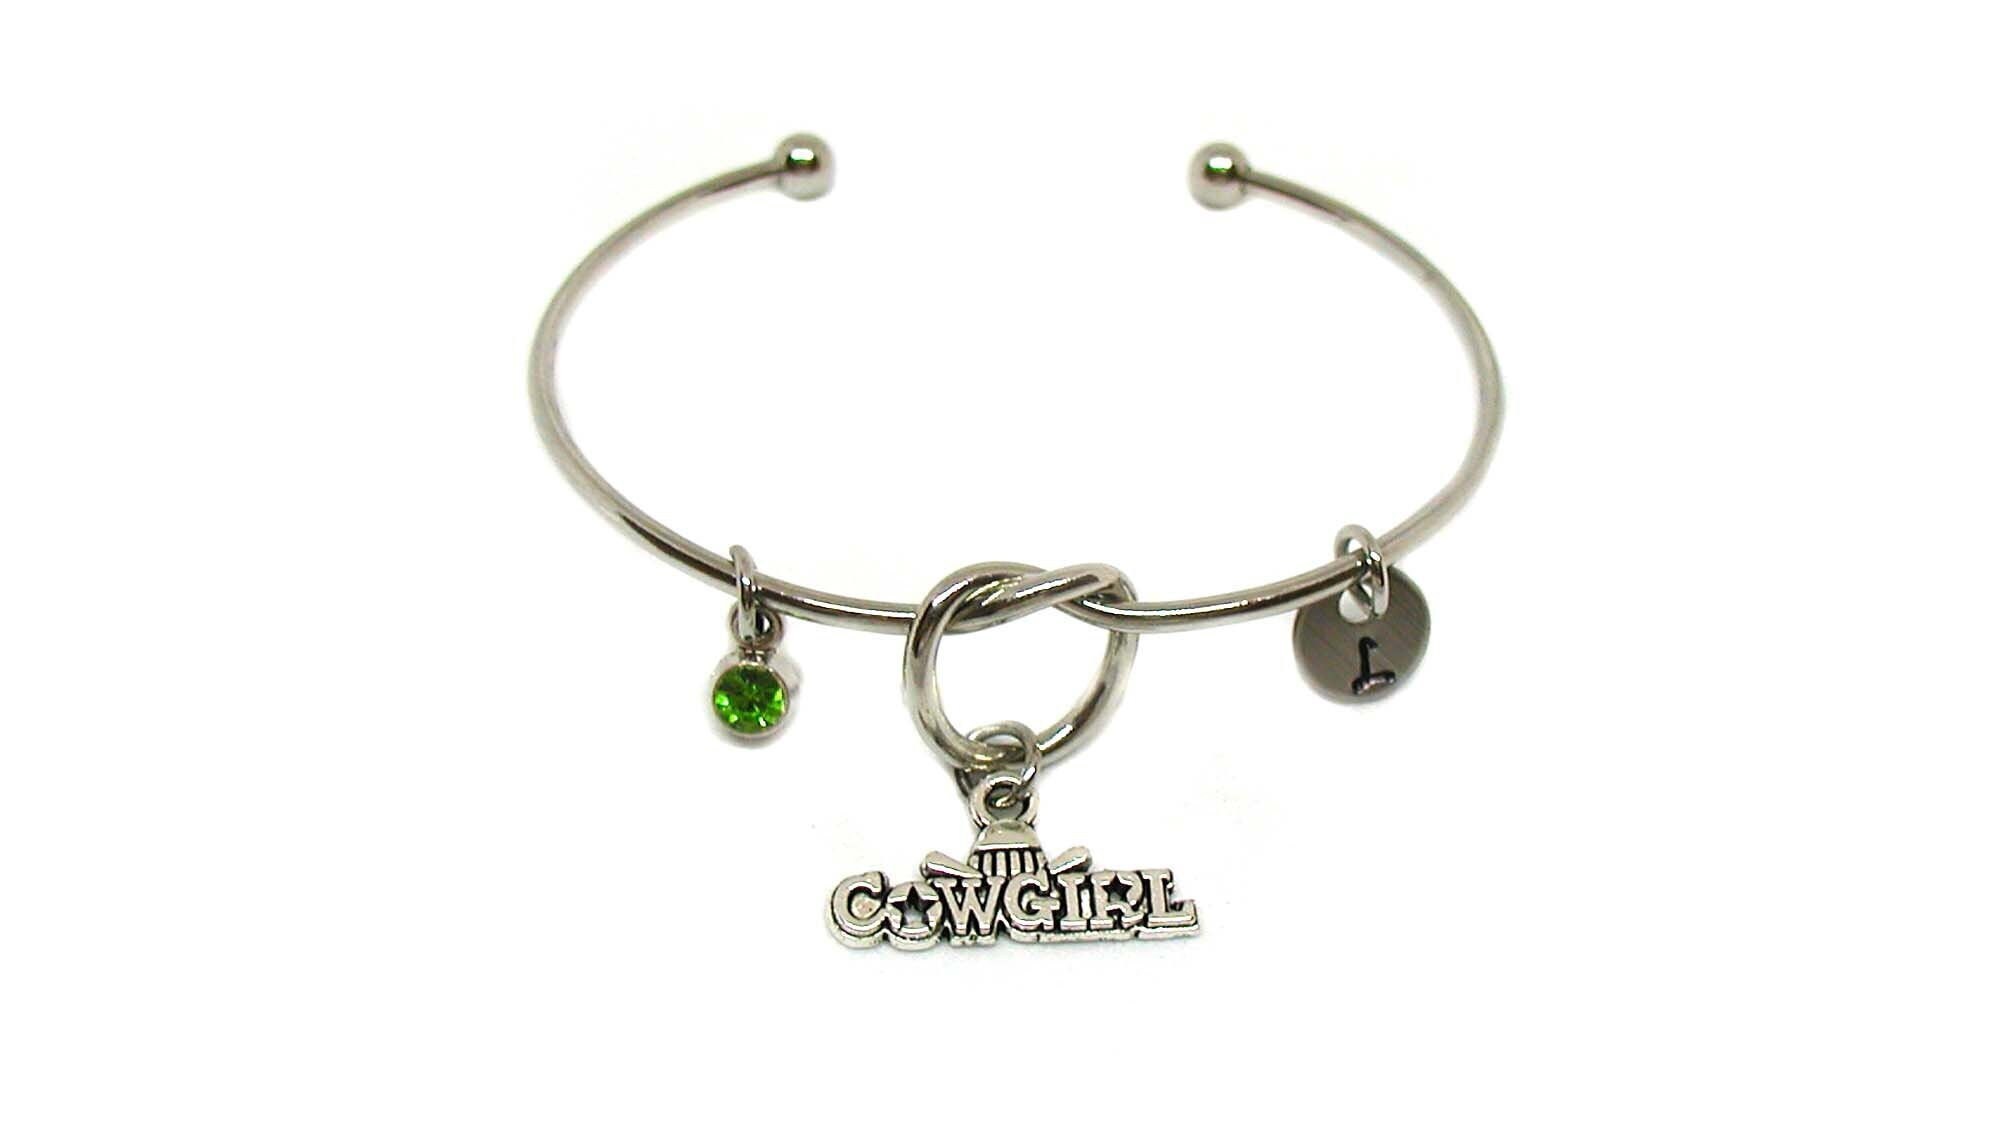 Western Bracelet Western Charm Cowgirl Knot Bracelet Cowgirl Jewelry Cowgirl Bangle Stainless Steel Bangle Cowgirl Knot Bangle Cowboy